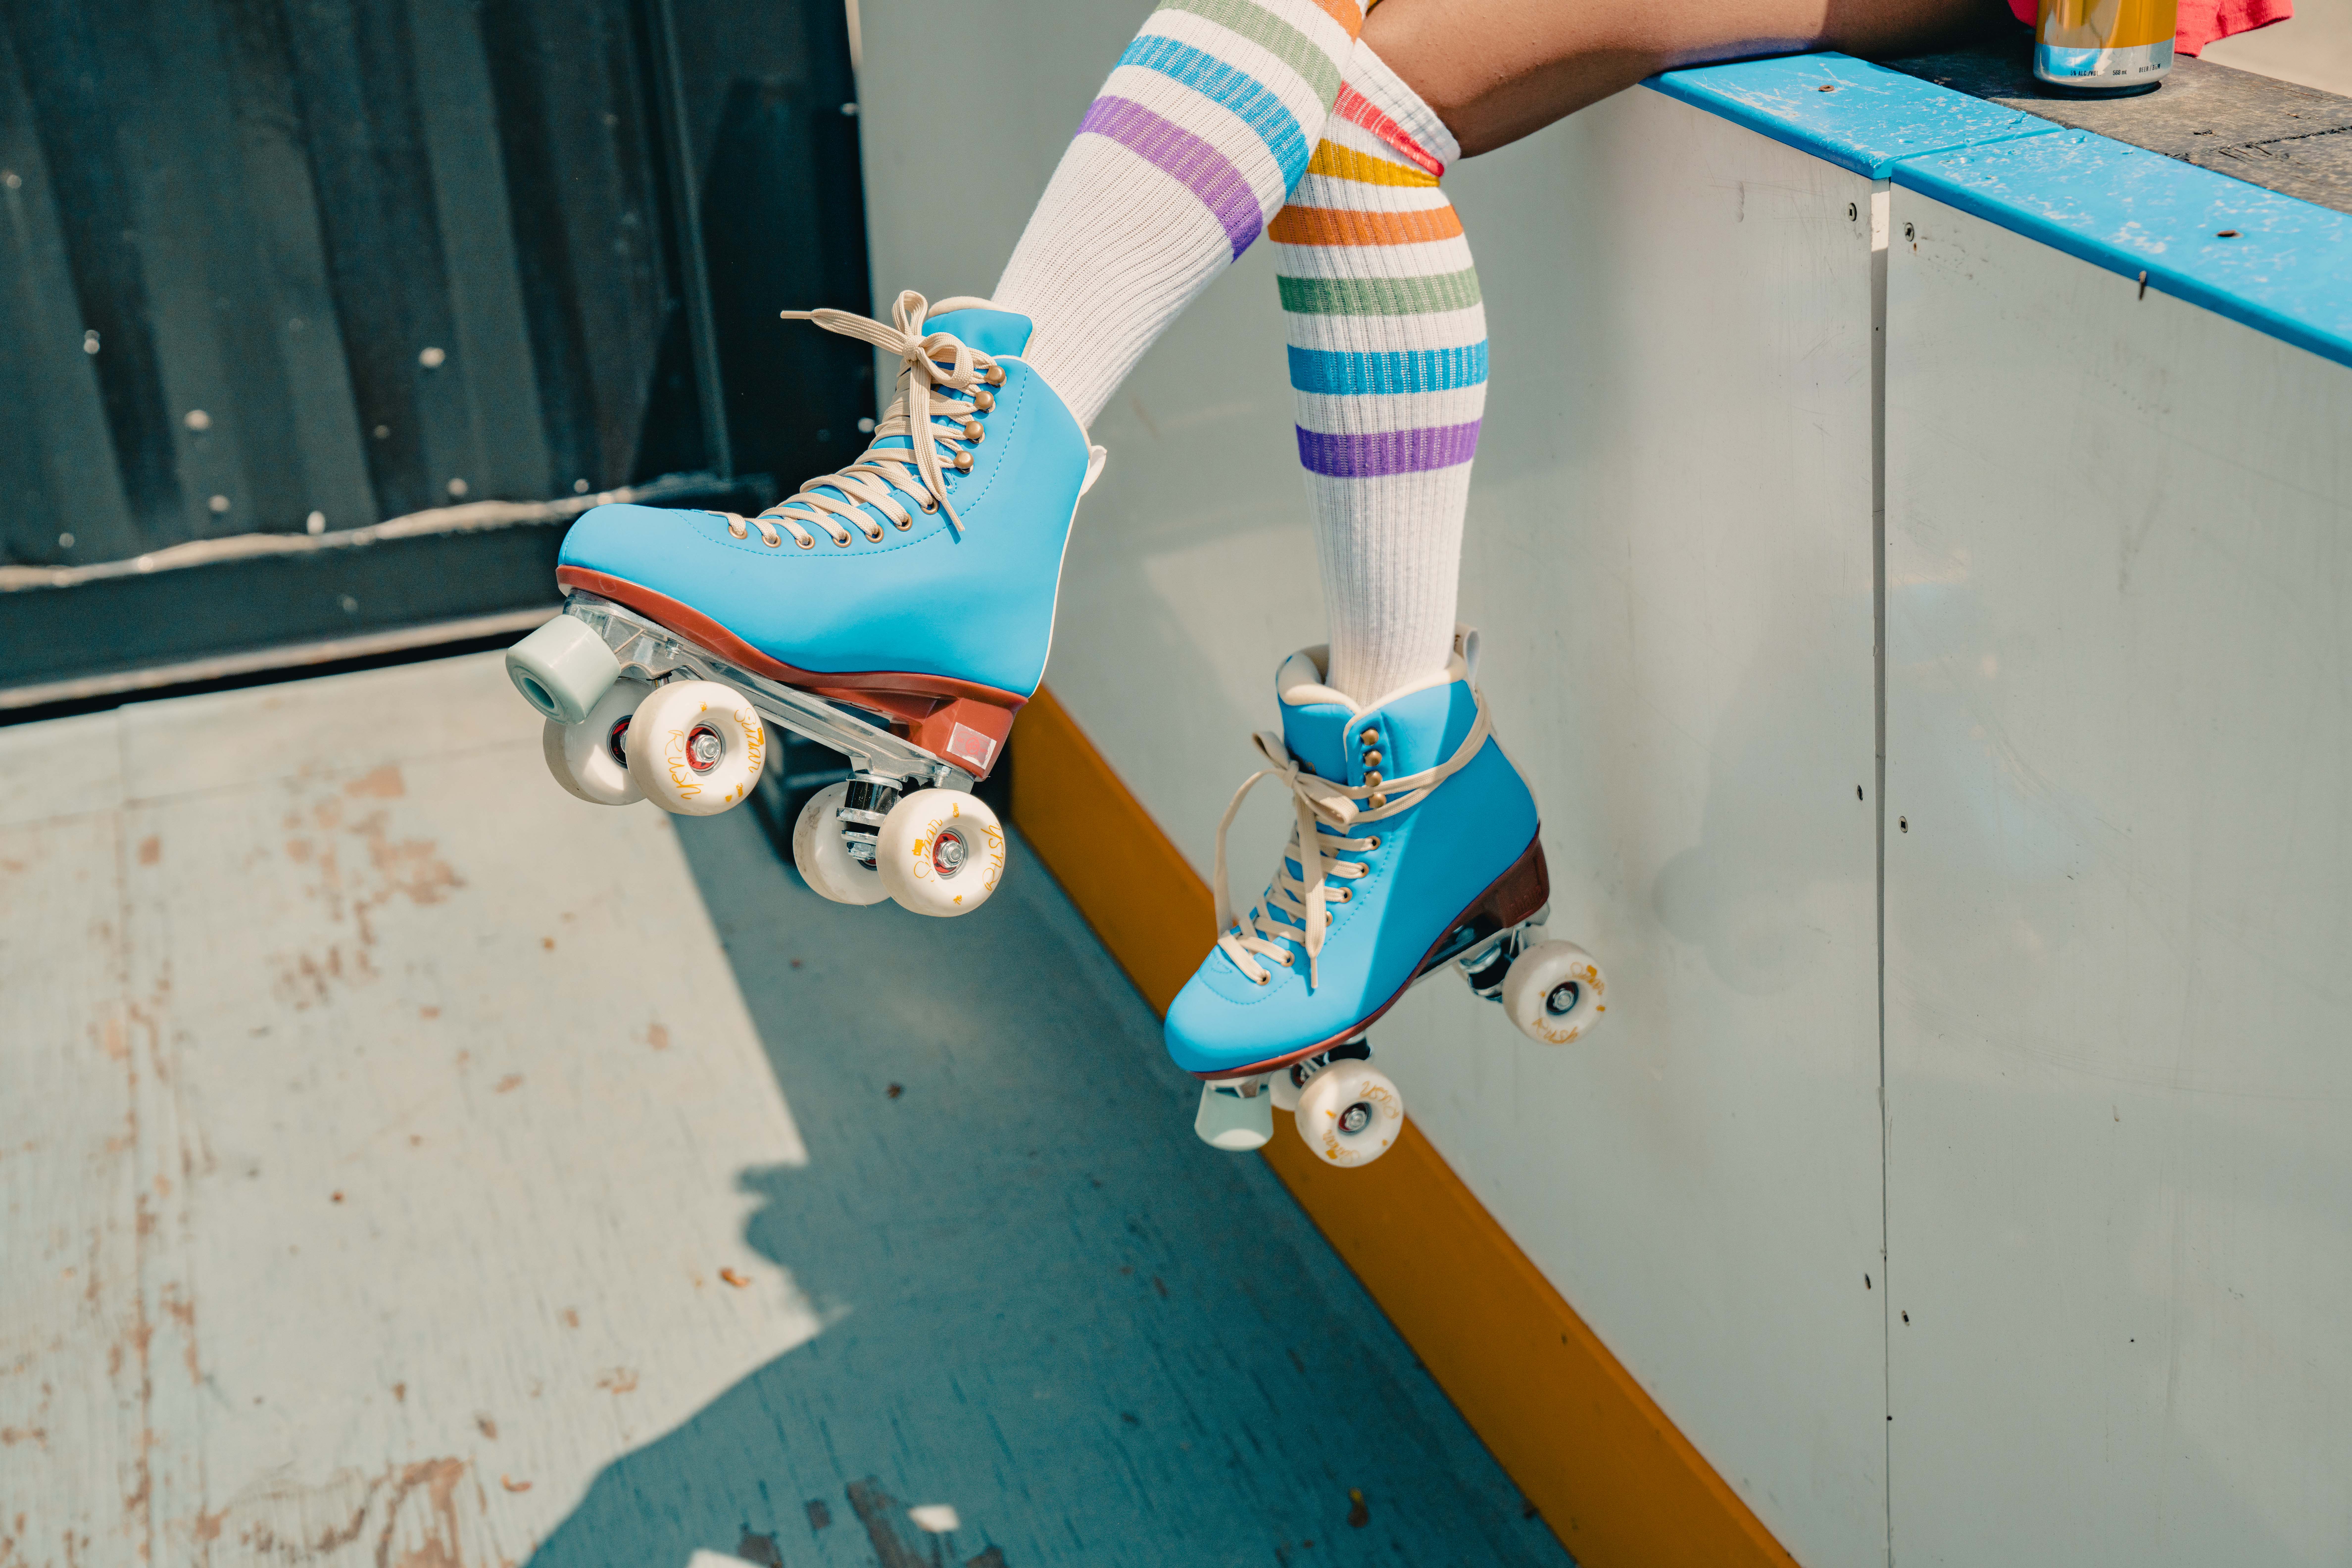 The lower half of someone's leg hang over a bench. They're wearing blue rollers skates on their feet.